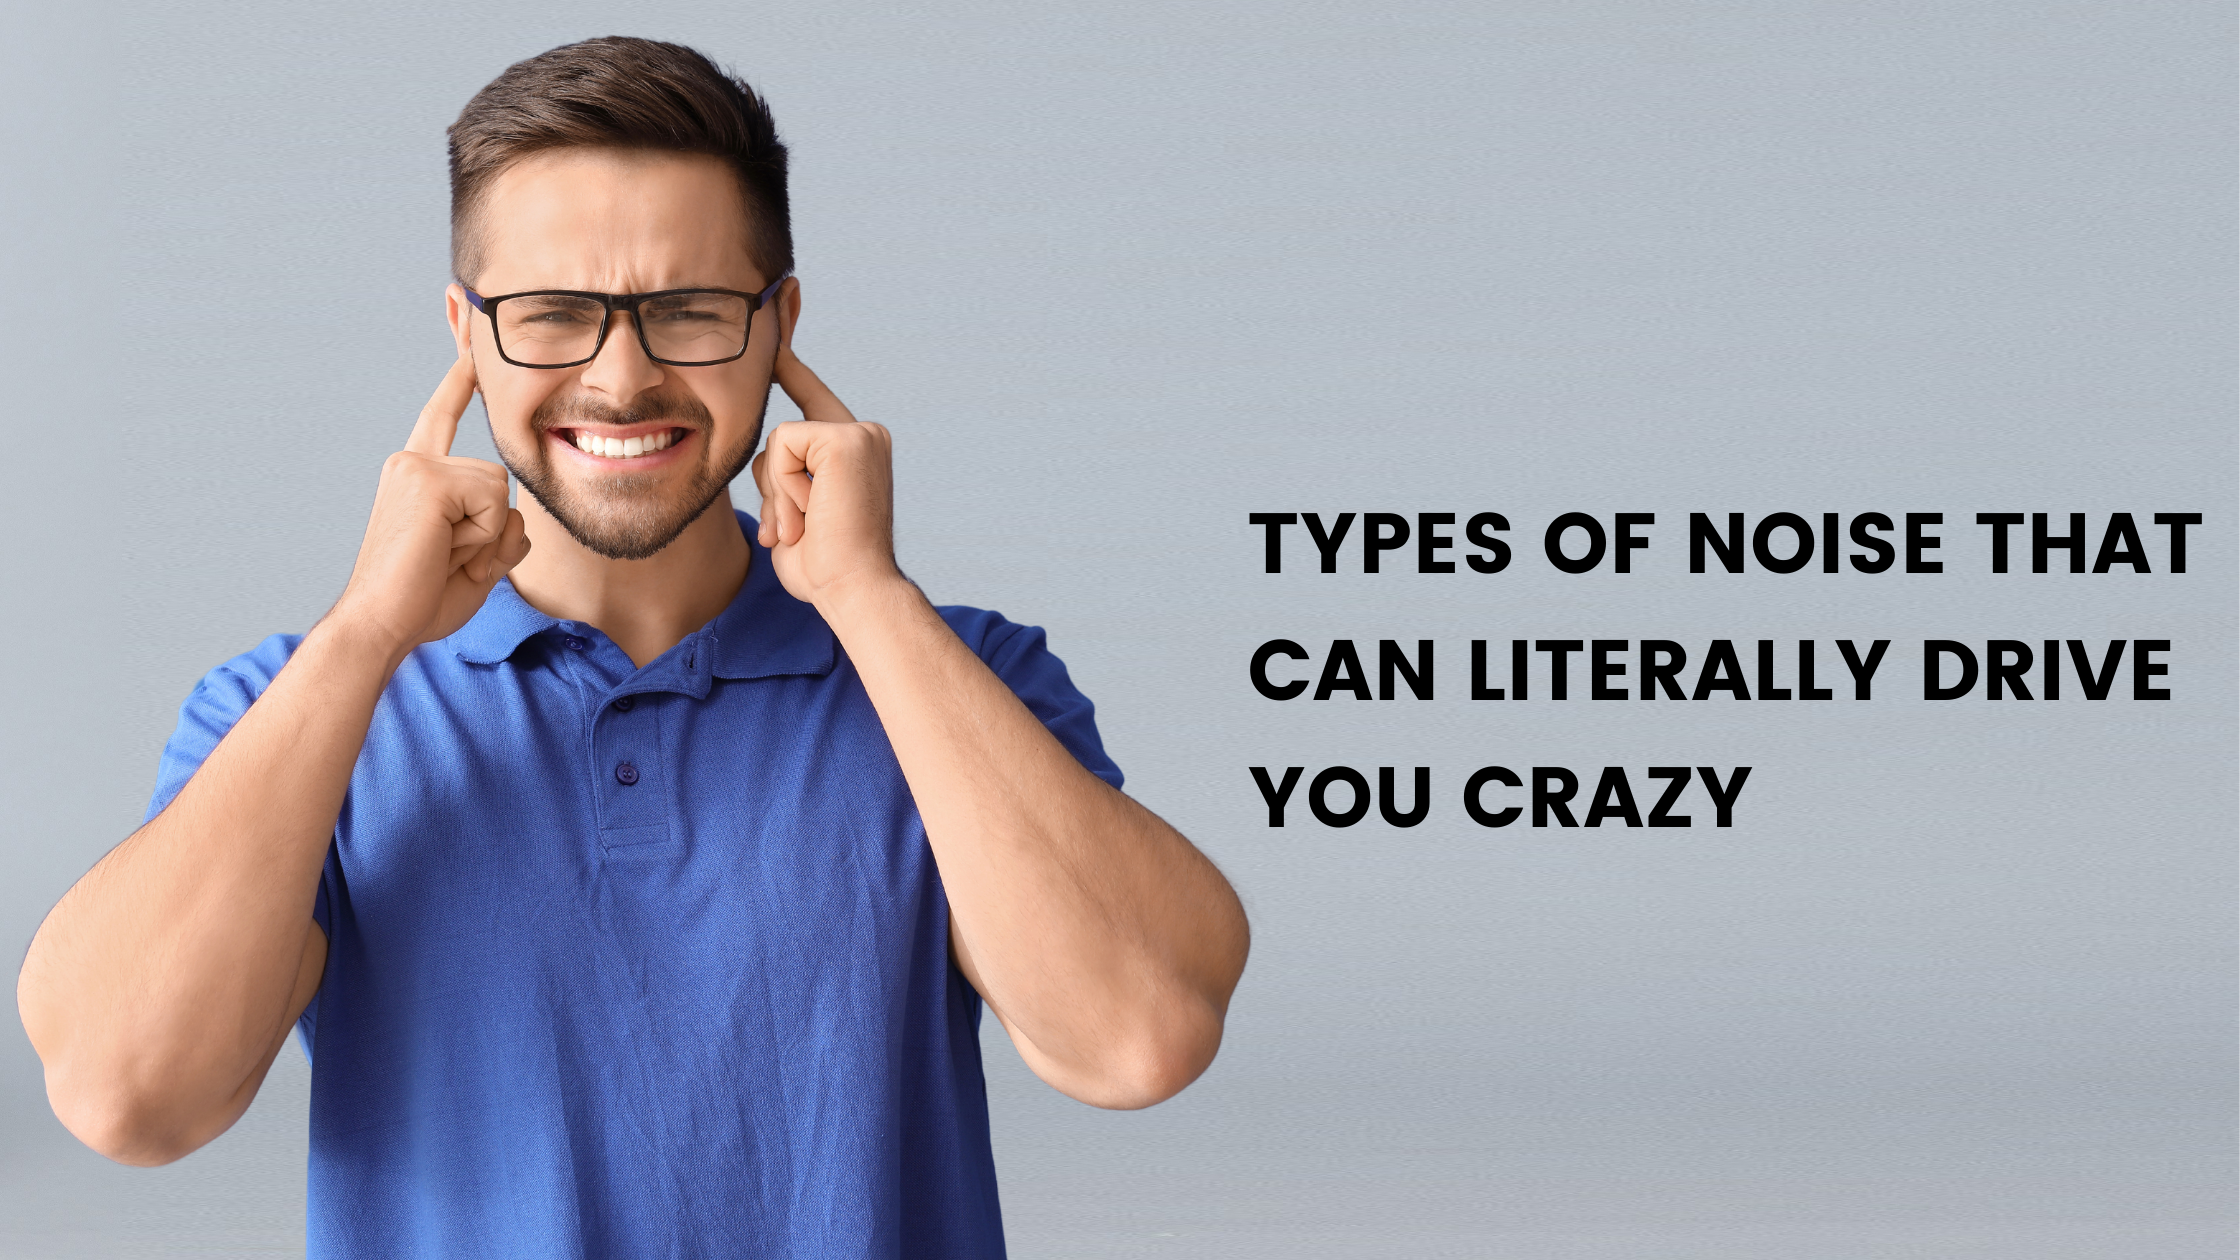 Types Of Noise That Can Literally Drive You Crazy